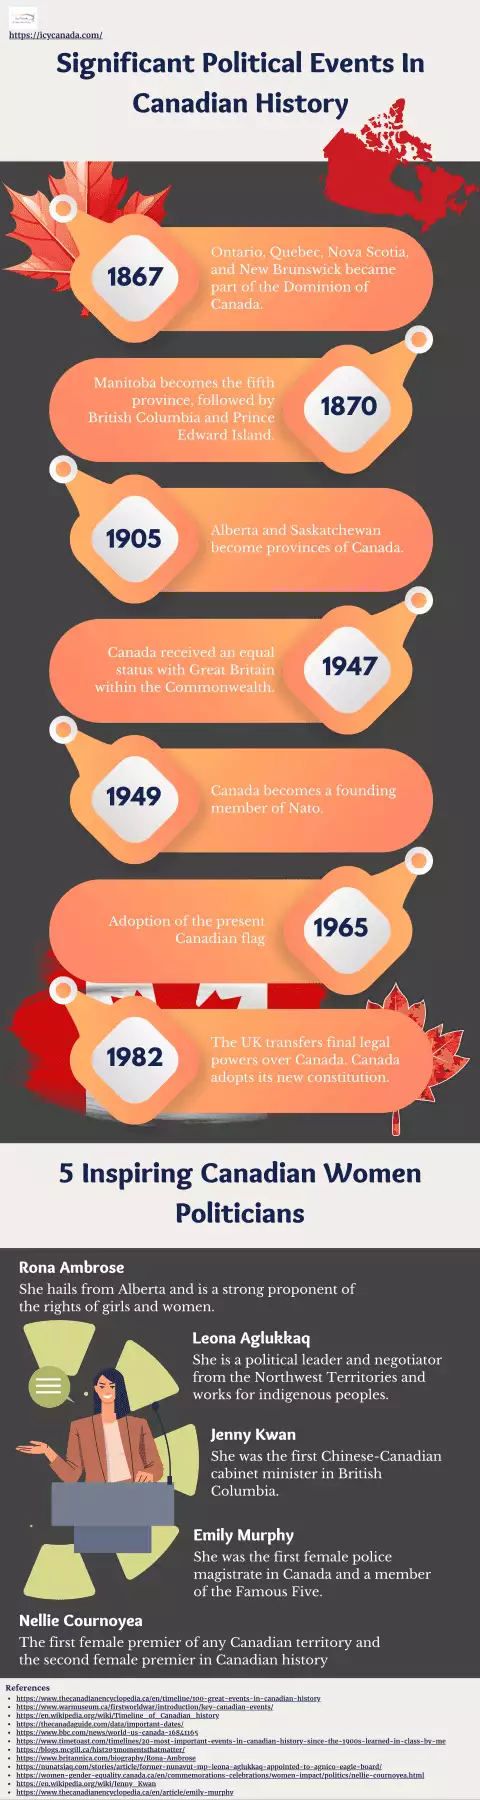 Significant Political Events In Canadian History